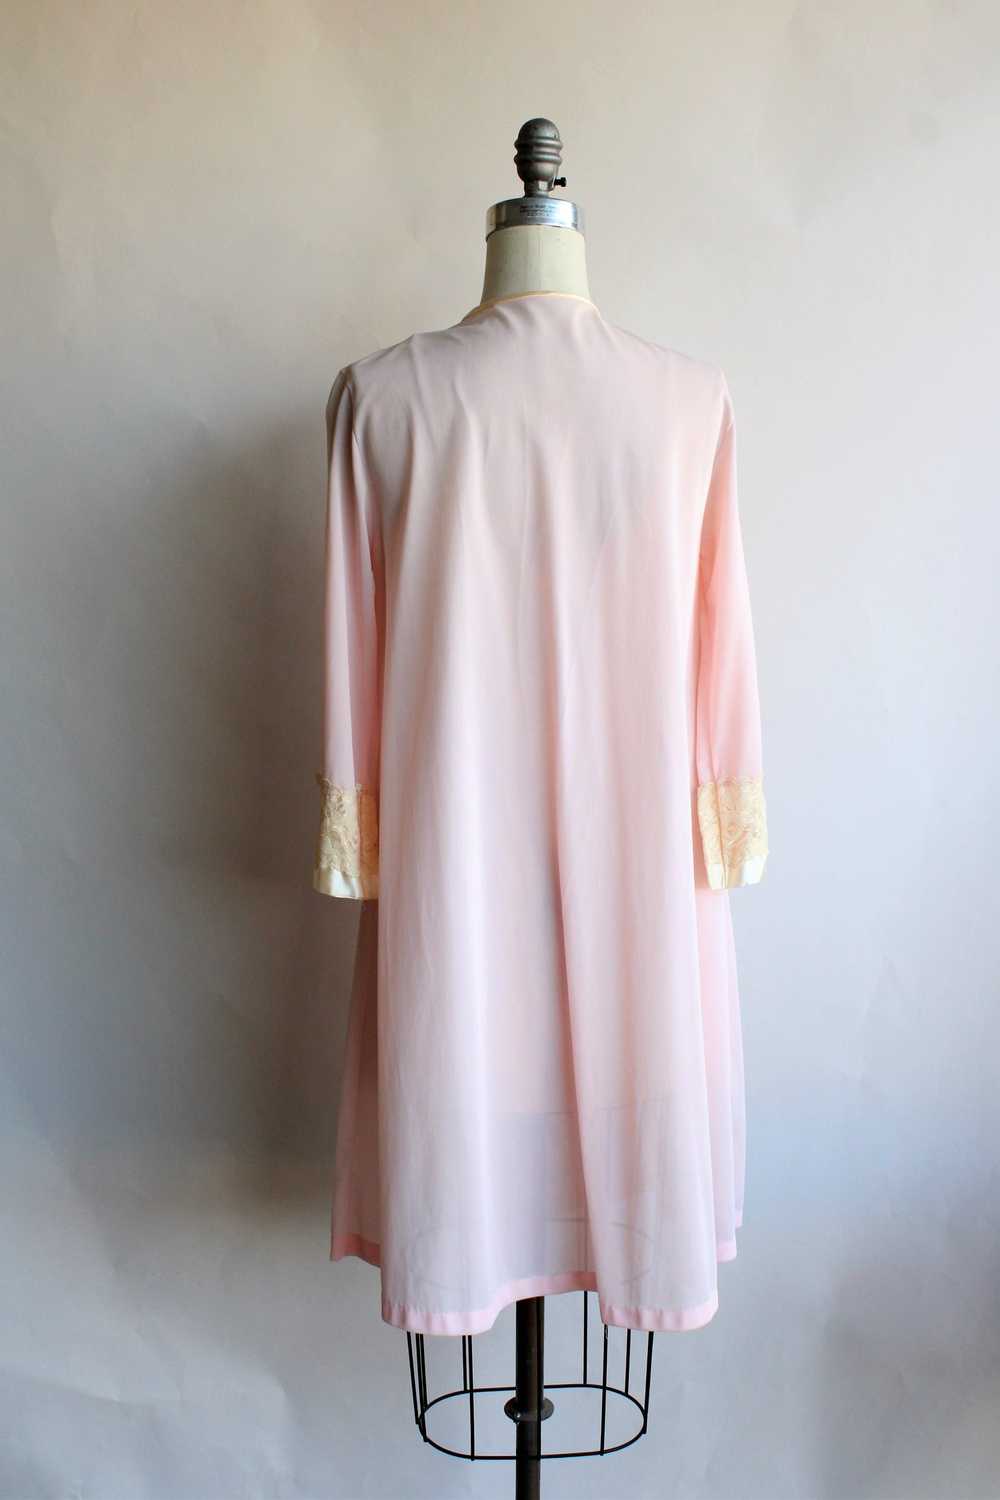 Vintage 1970s Gilead Pink And Lace Nylon Robe wit… - image 7